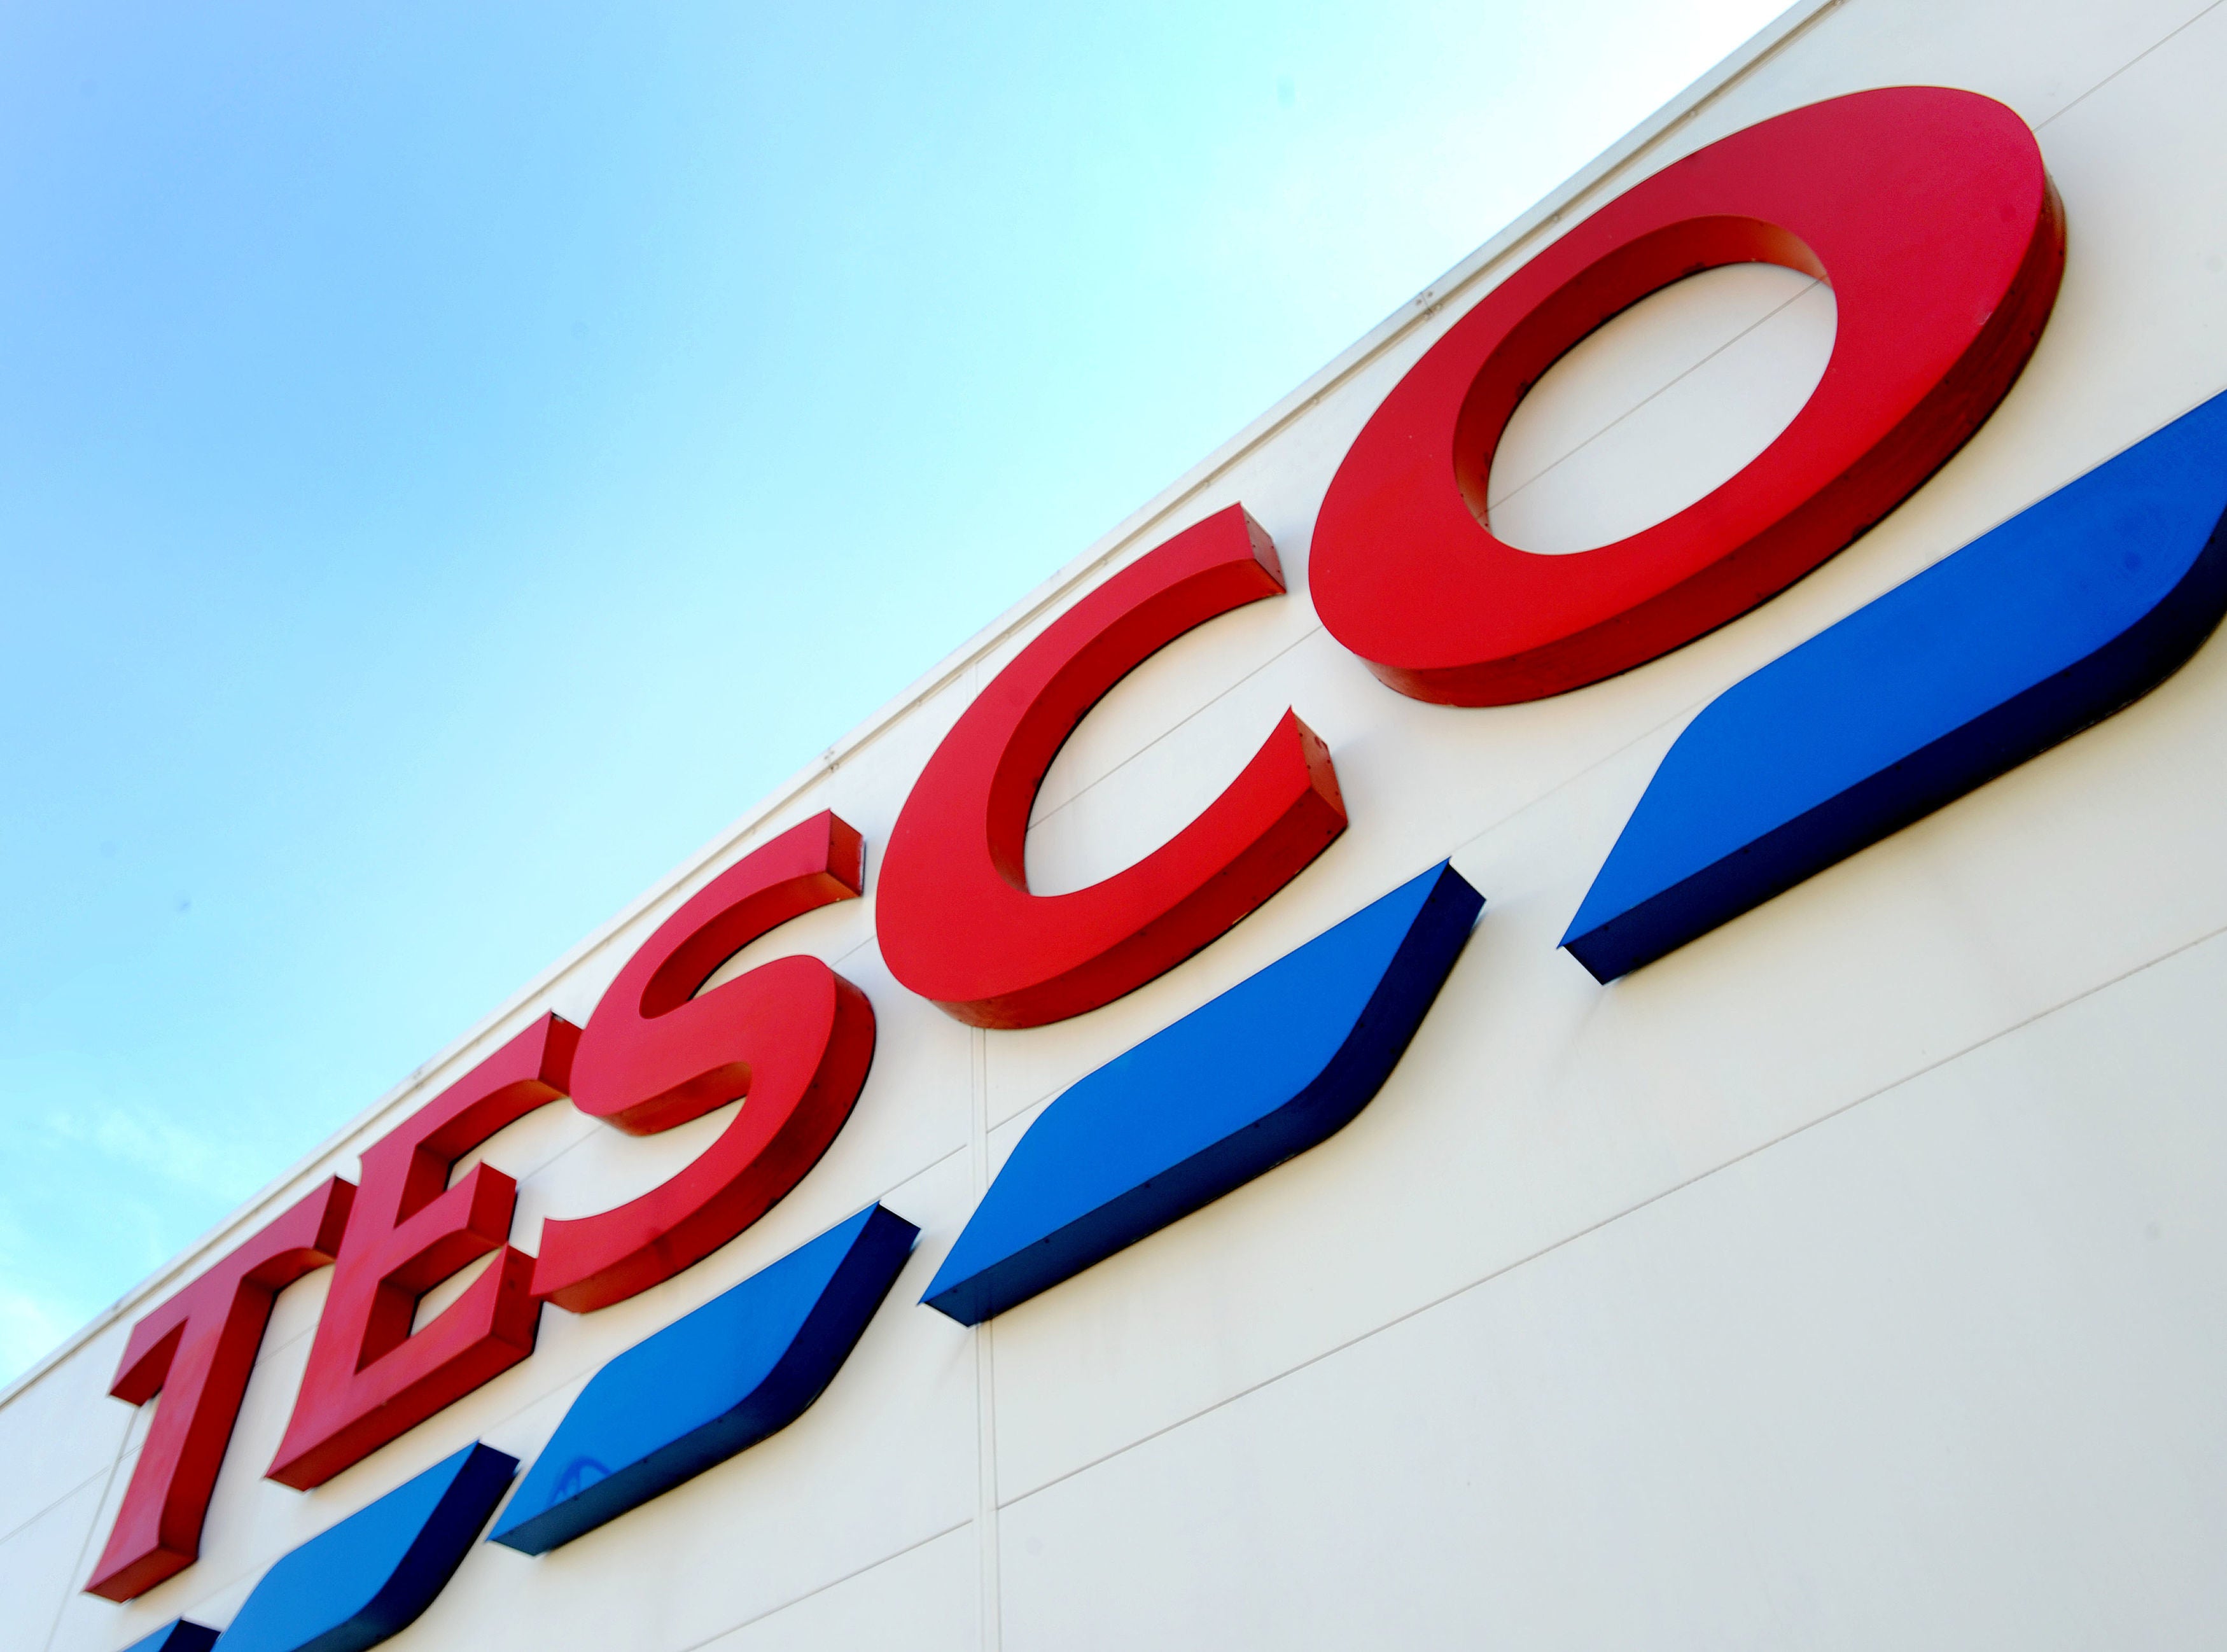 Unite announces strikes by warehouse workers and drivers at Tesco over pay (Nick Ansell/PA)